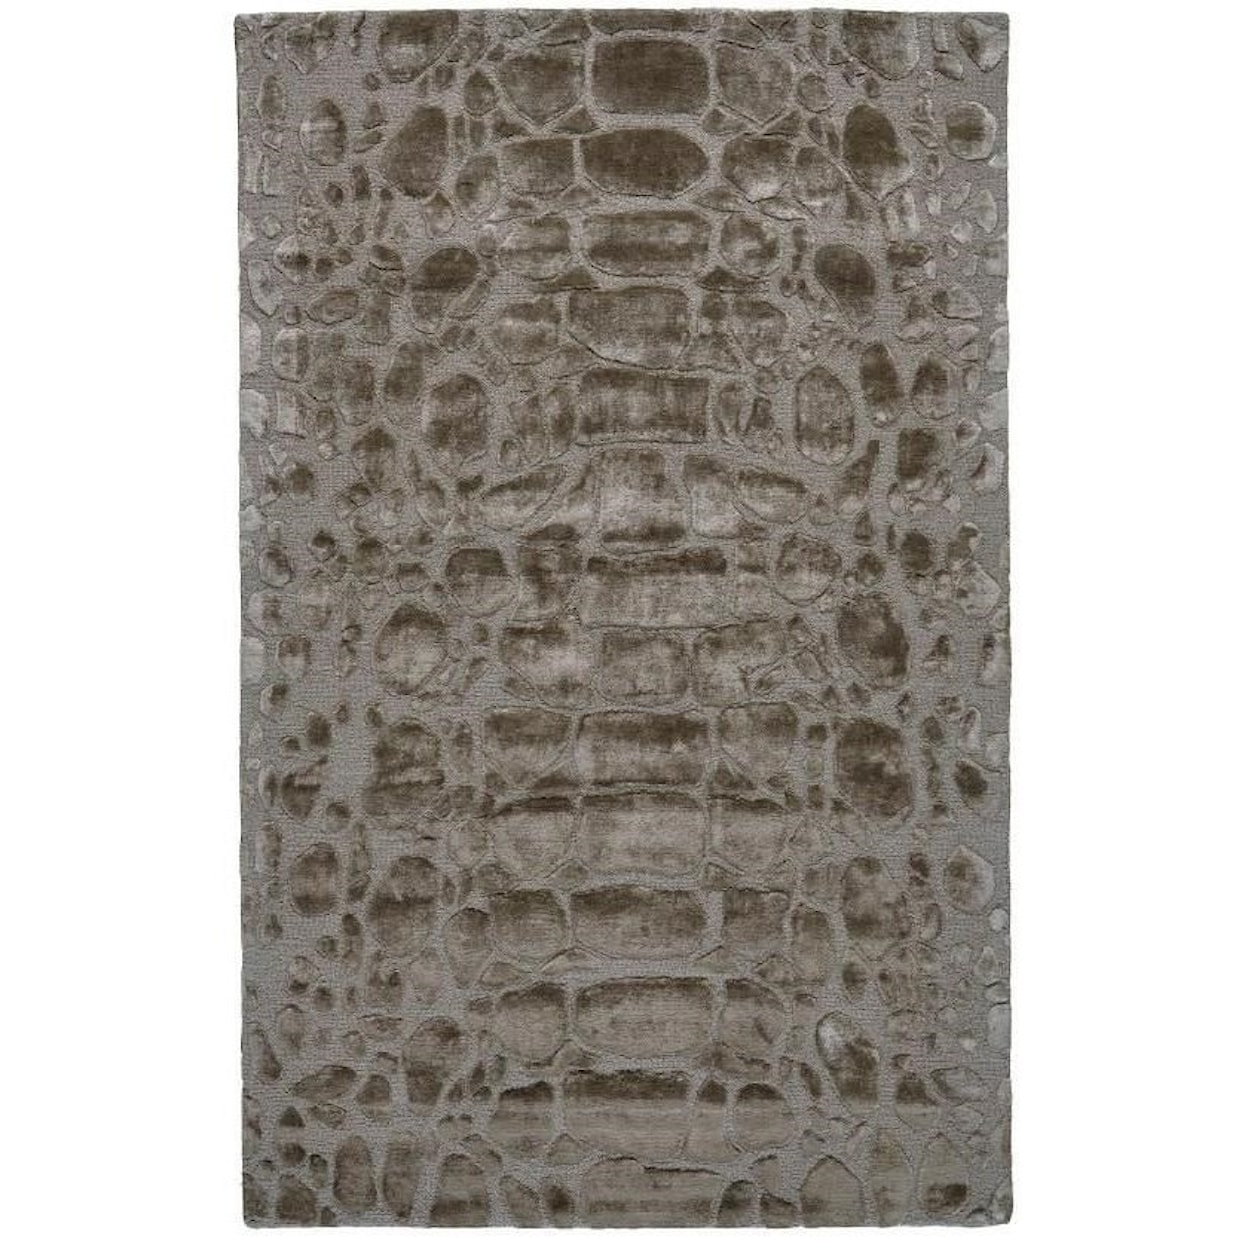 Feizy Rugs Mali Pewter 5' x 8' Area Rug